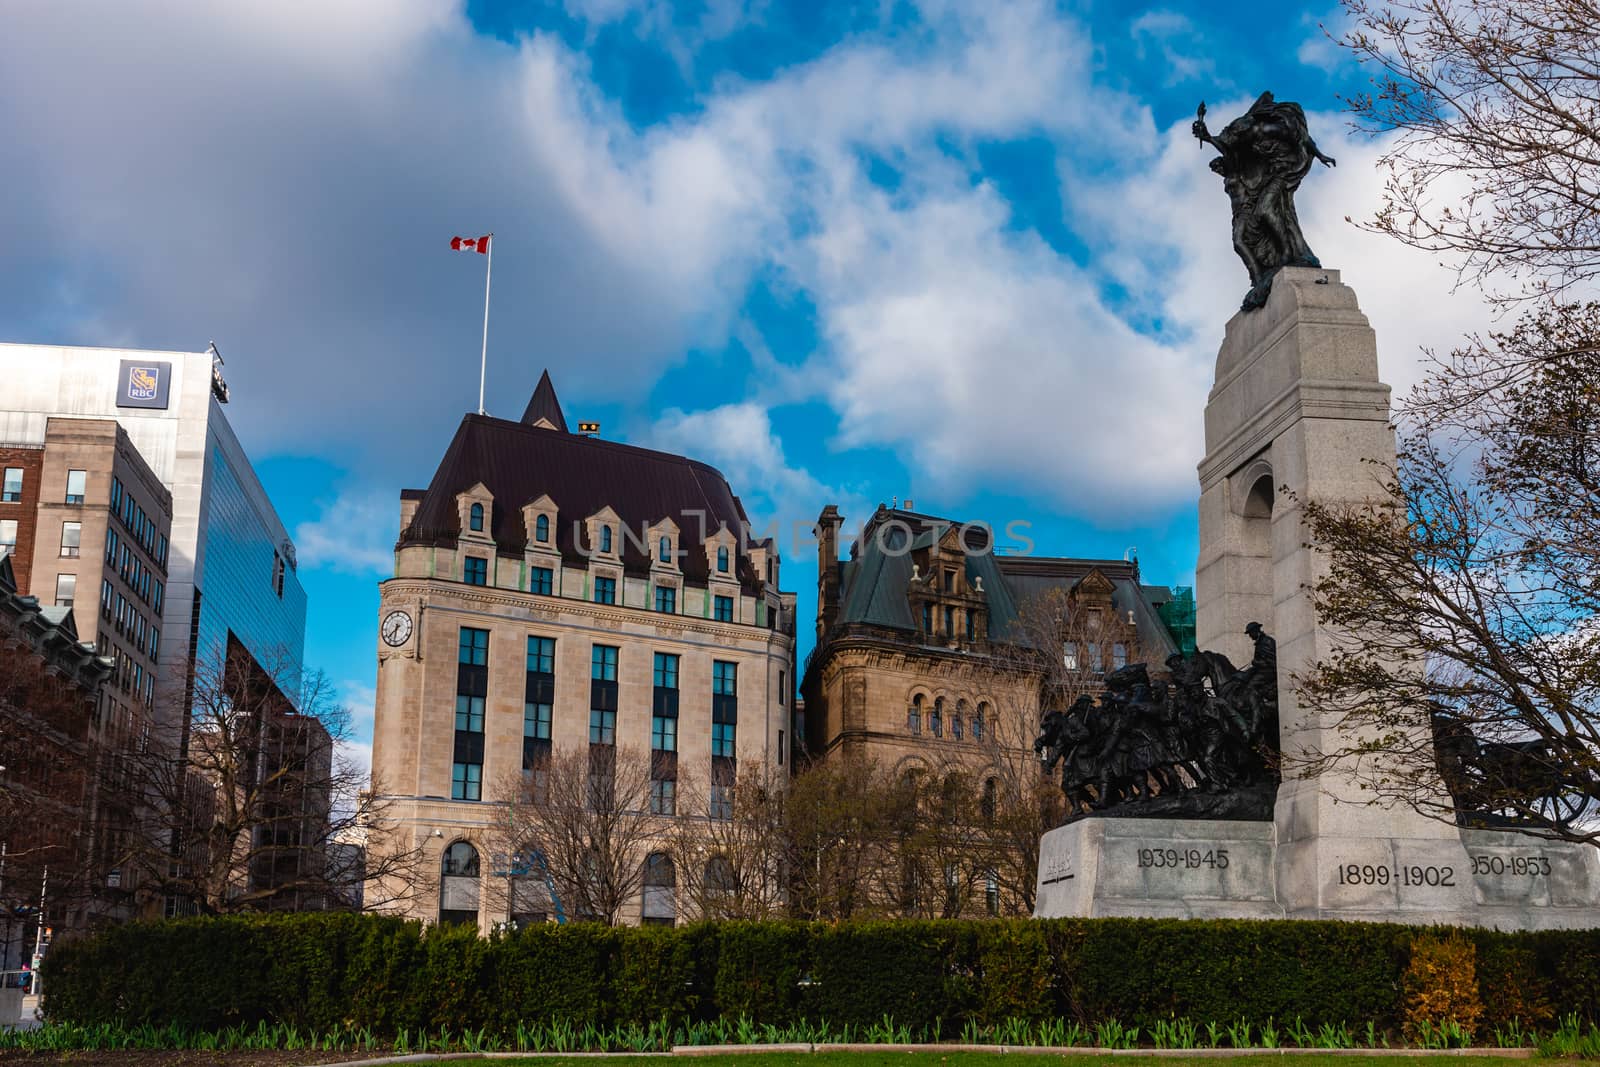 The National War Memorial in Confederation Square of downtown Ottawa, Ontario, Canada is a cenotaph commemorating soldiers who died in wars with Canadian involvement.